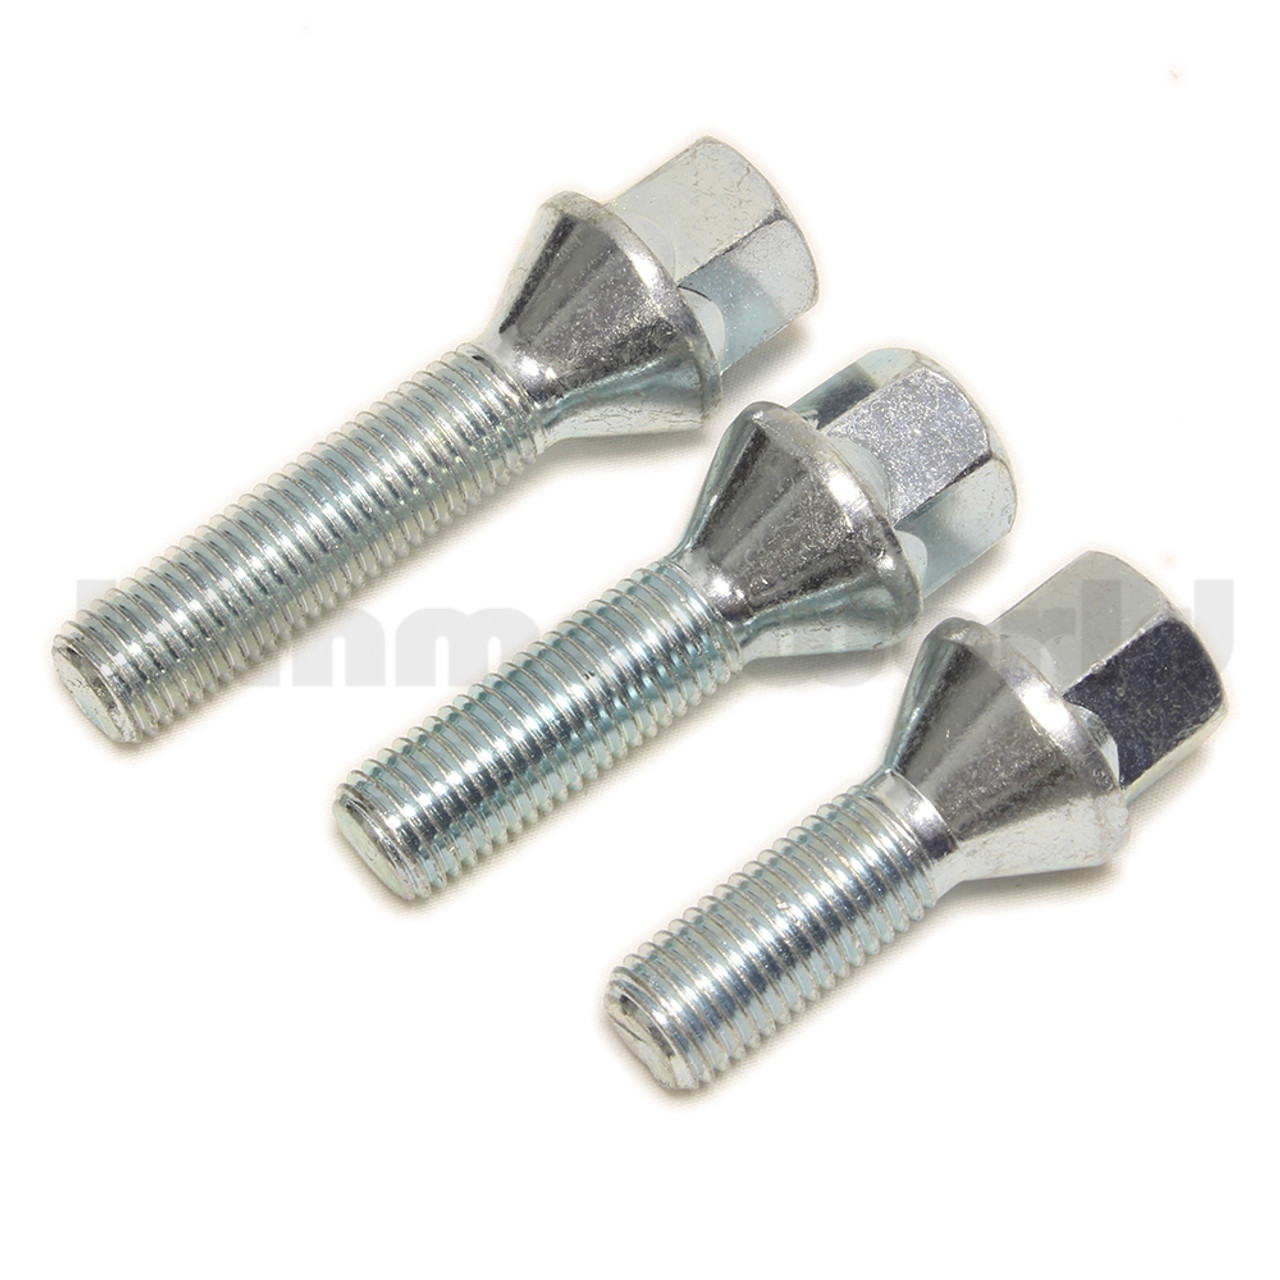 M14x1.25 Extended Length Wheel Bolts for Wheel Spacers  - Silver - 50mm